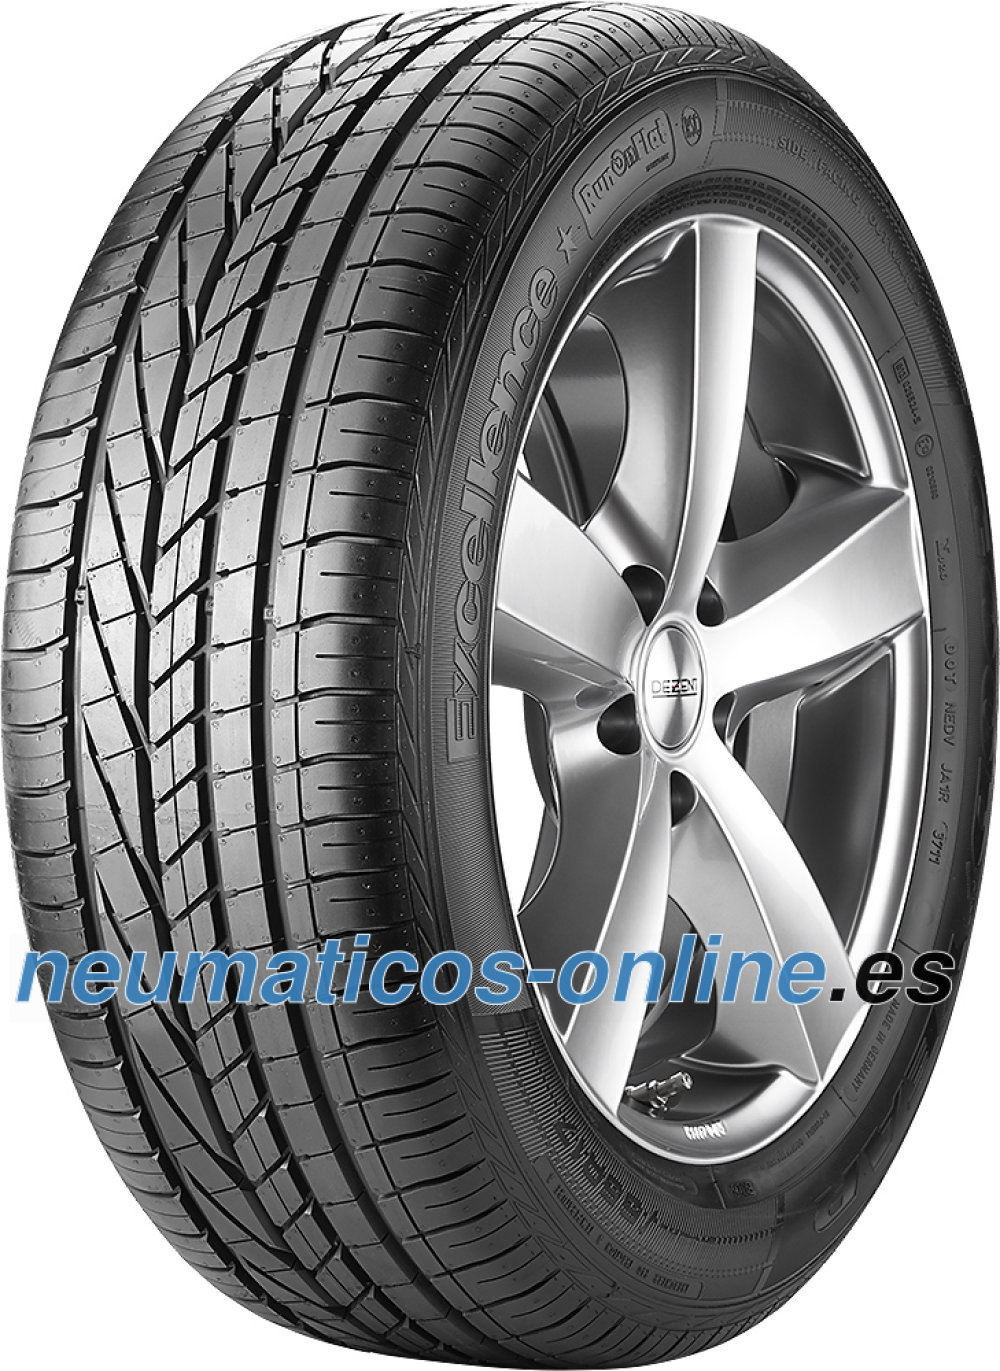 Goodyear Excellence ROF 225/45 R17 91W MOExtended, runflat